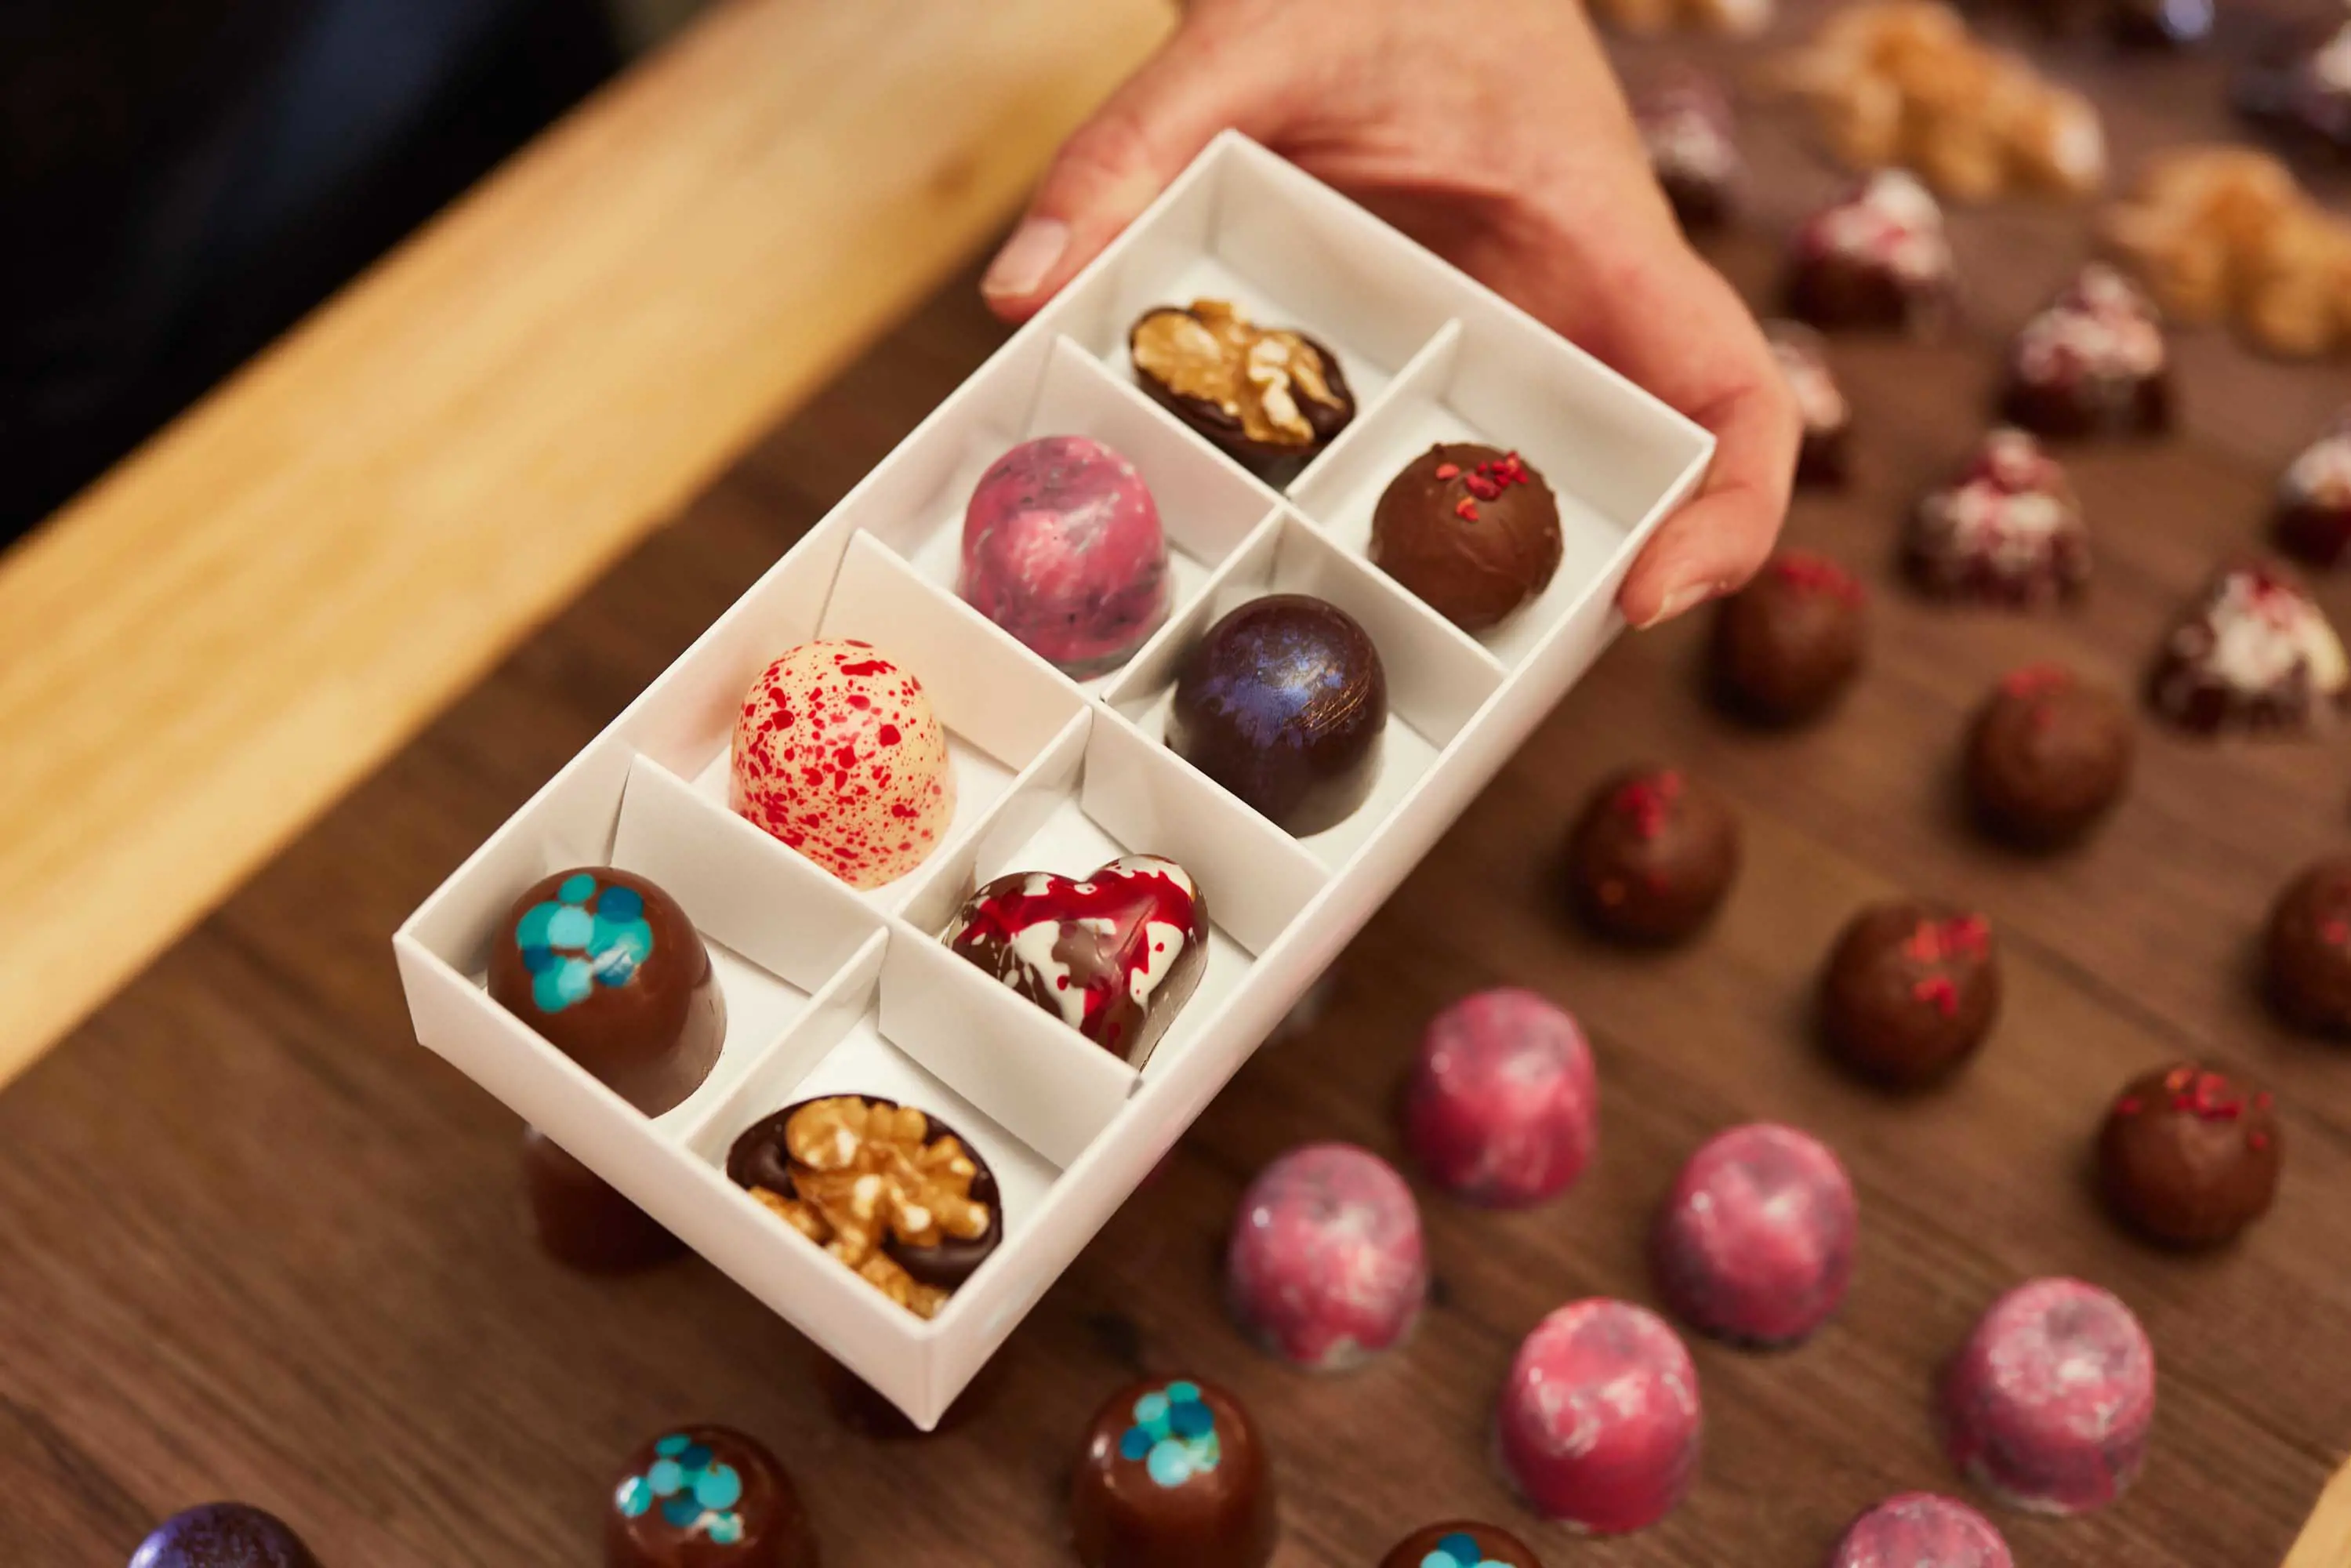 Eight, round,  multi-coloured chocolates are displayed in a white box and held above a cabinet filled with other chocolate varieties.